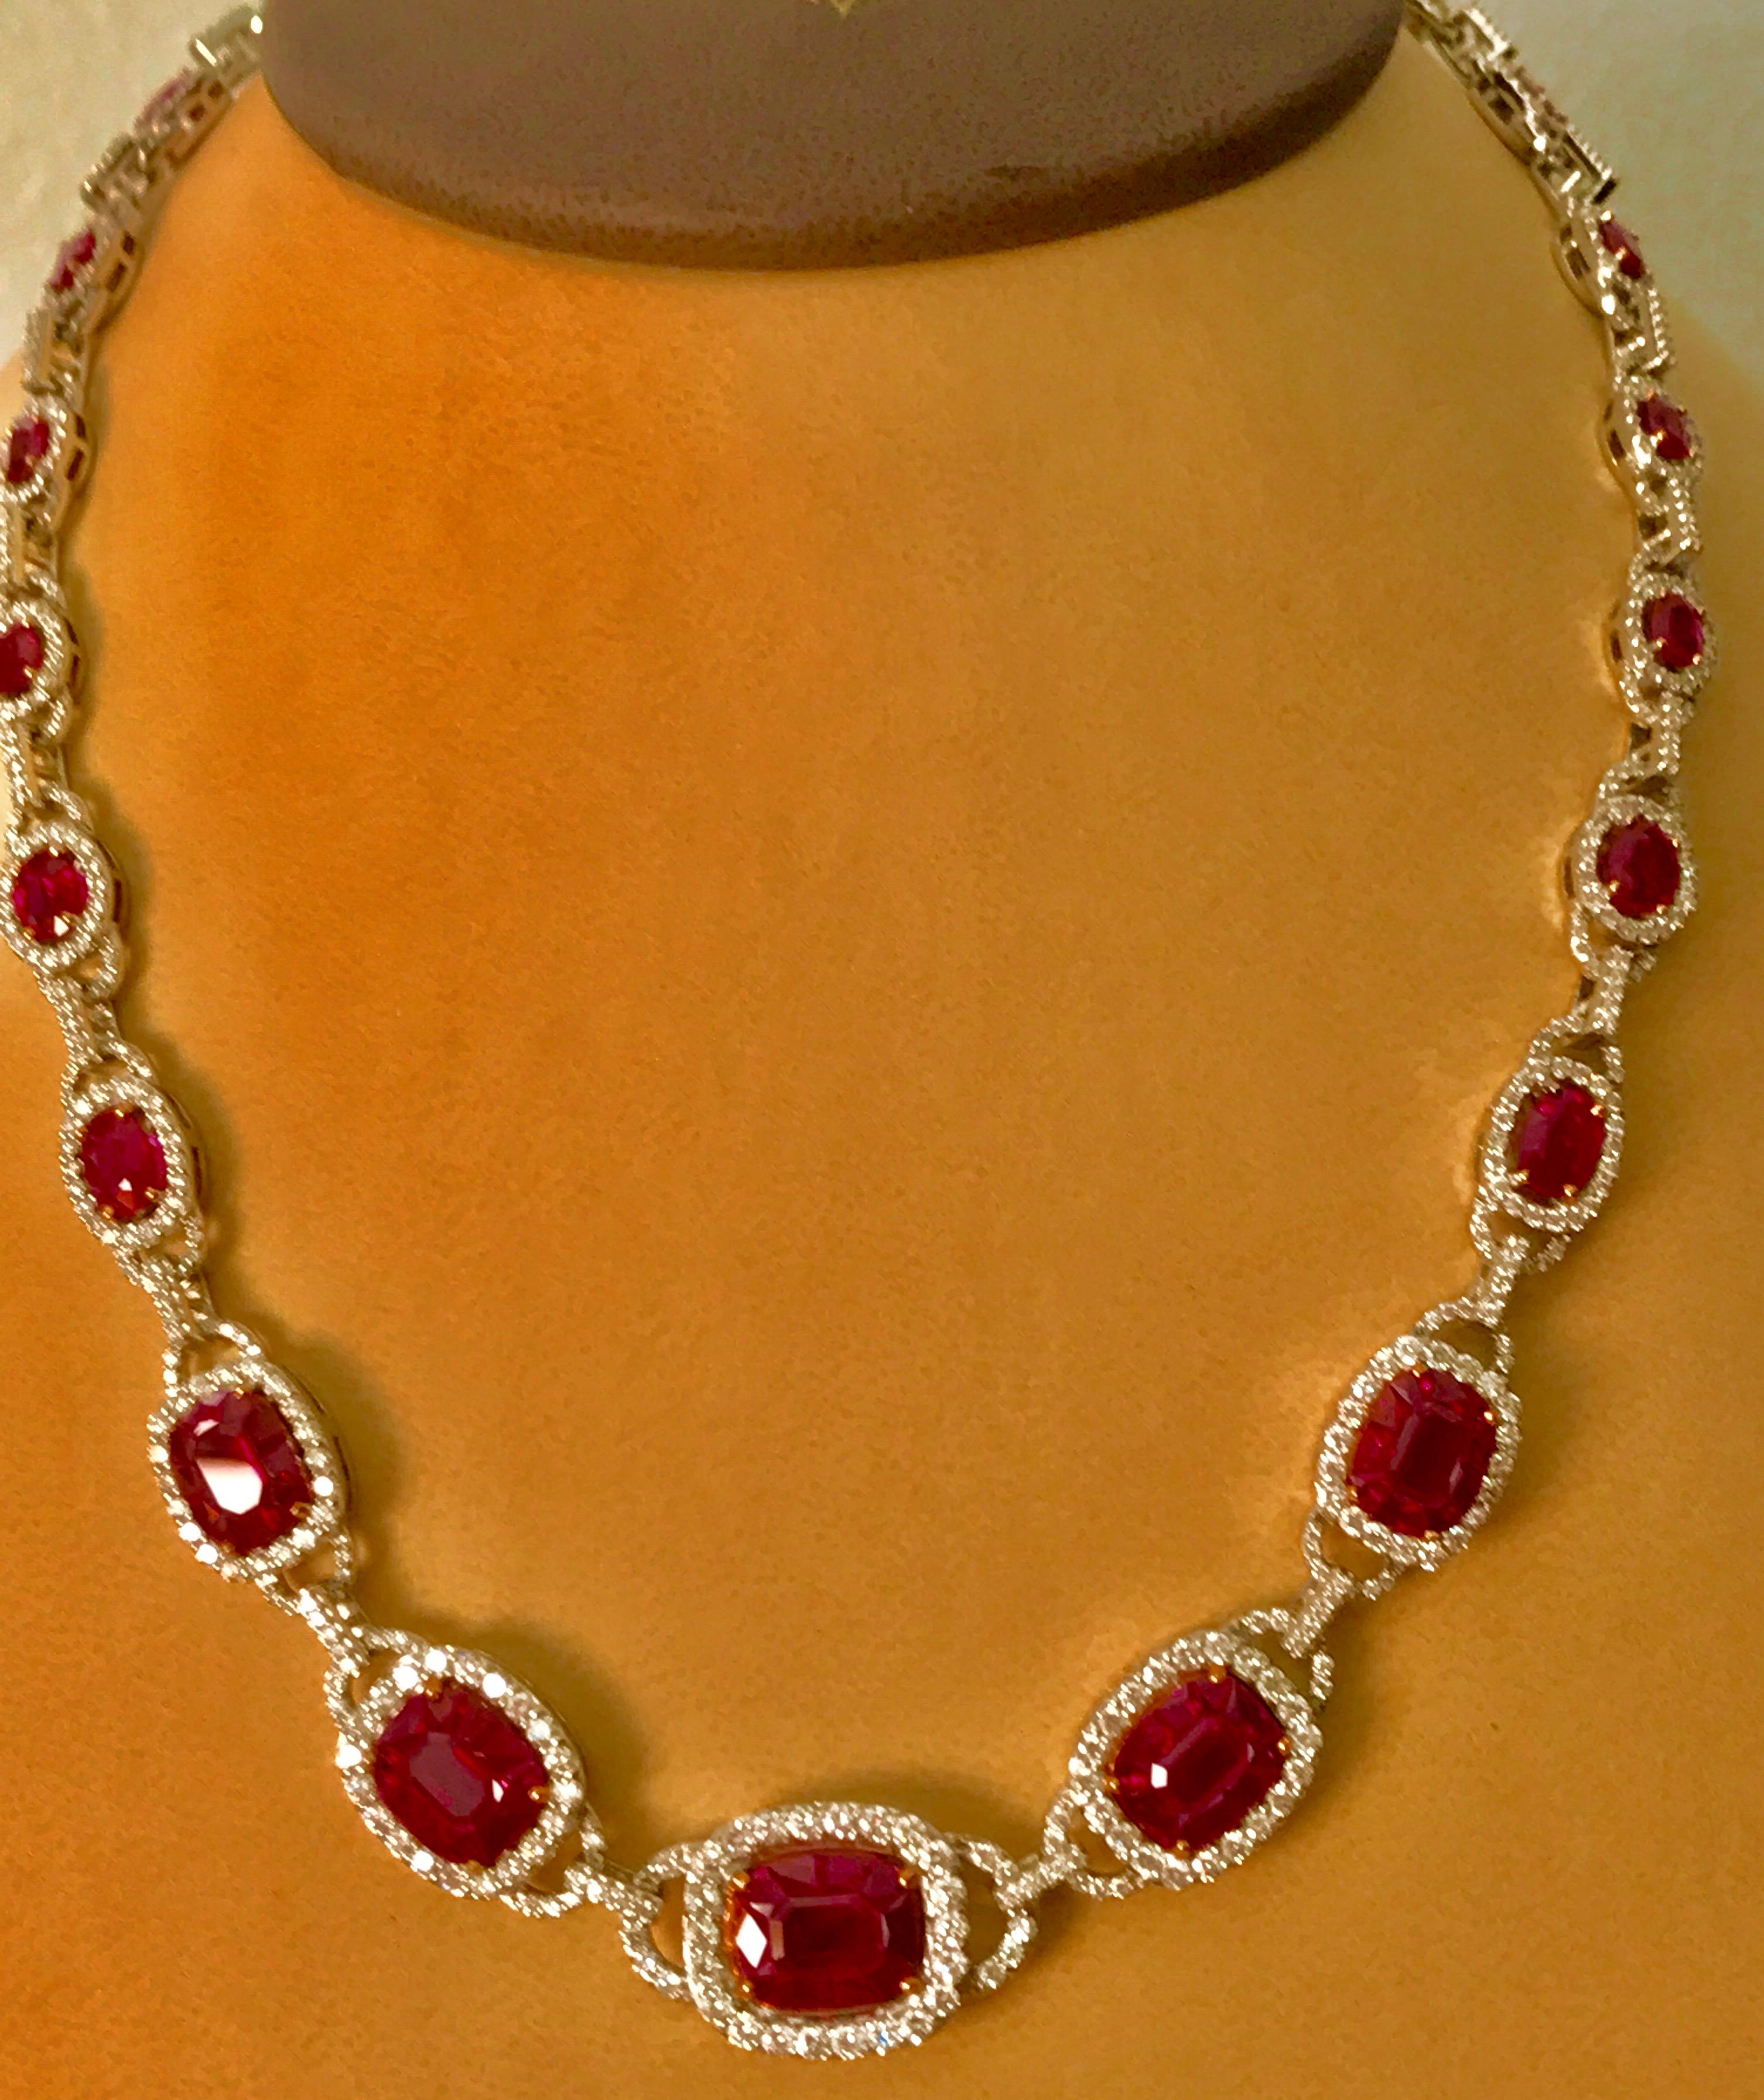 GIA Certified 45 Carat Natural Burma Ruby & Diamond Necklace 18 Karat White Gold In Excellent Condition For Sale In New York, NY